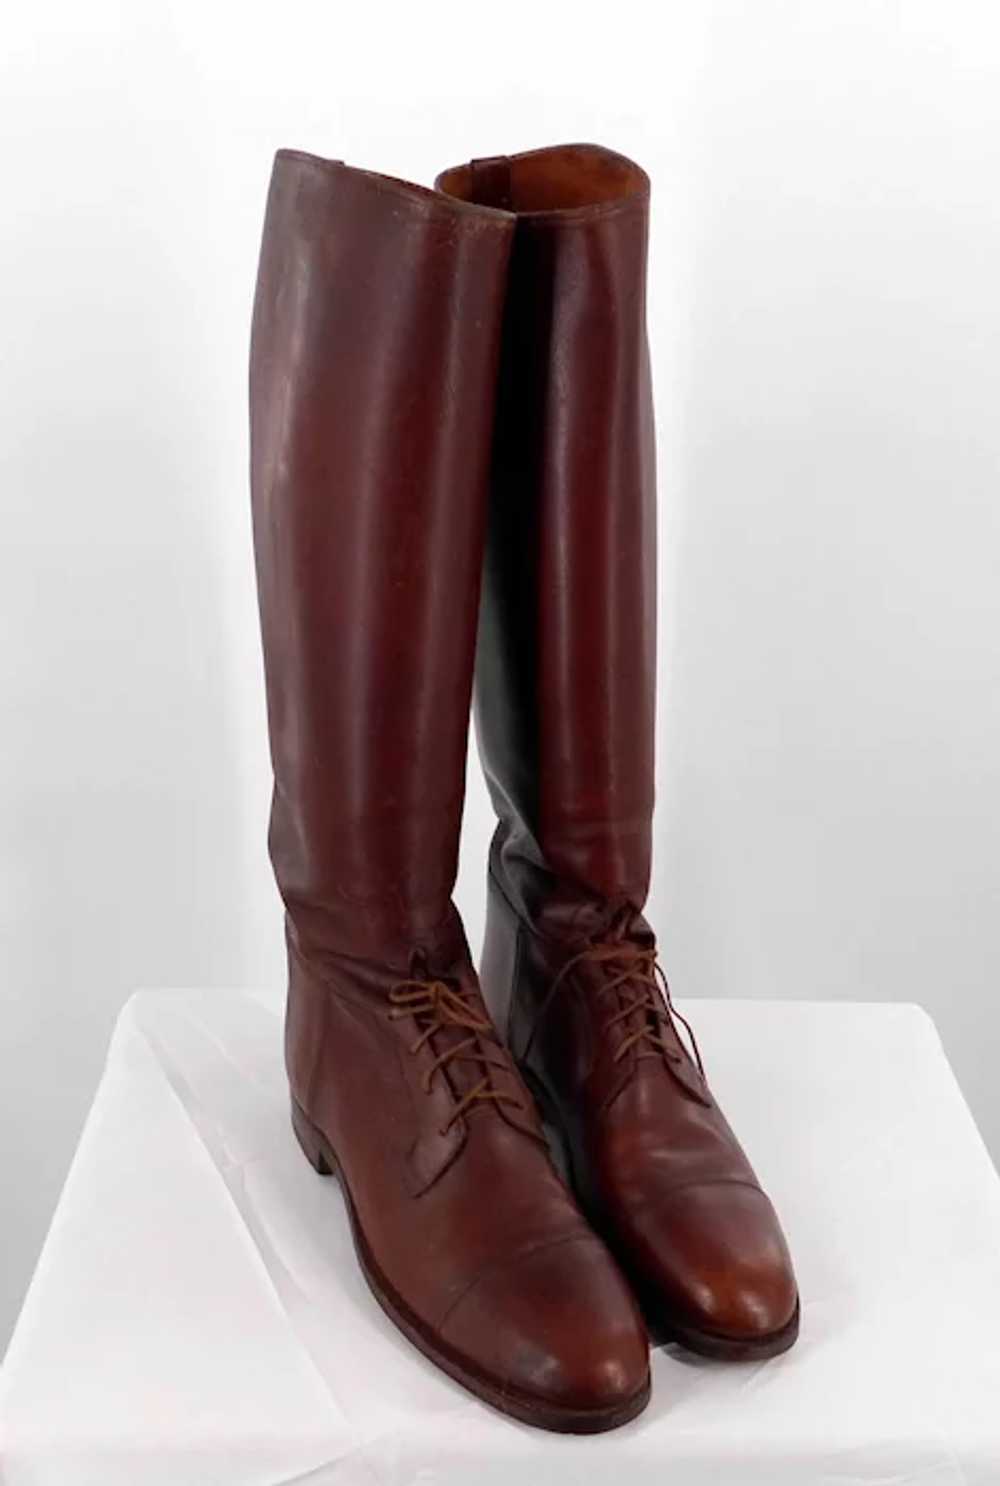 Handsome Custom-Made Men's Tall Boots Made by The… - image 2